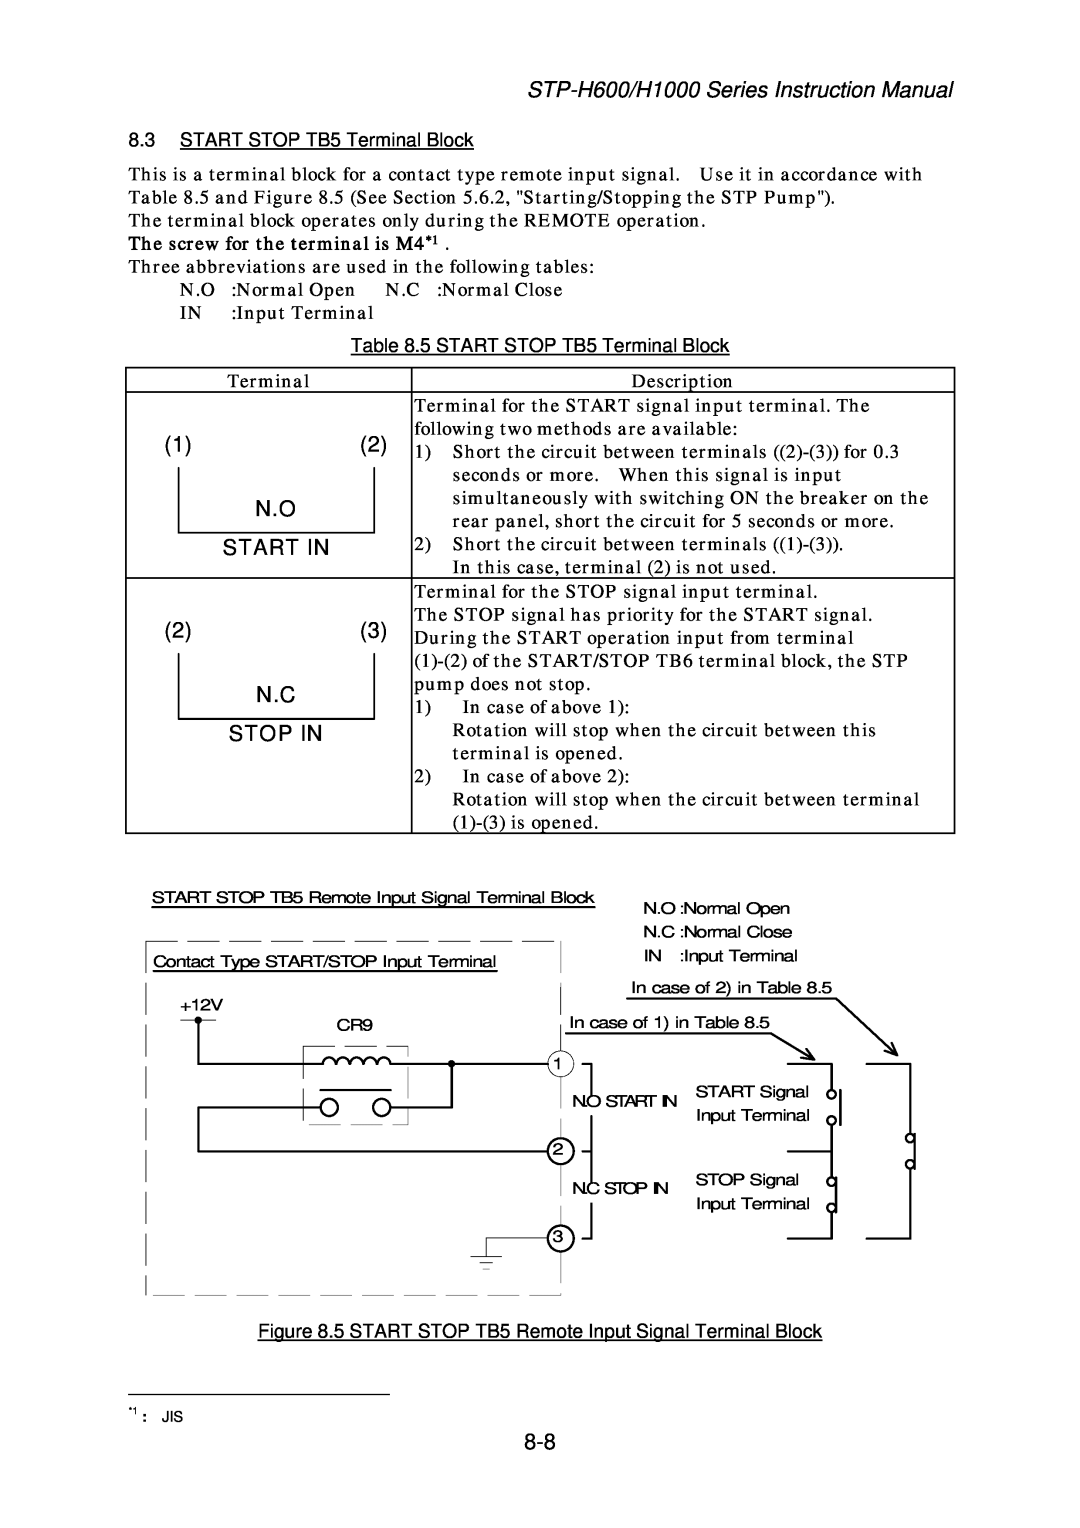 Seiko Instruments MT-17E-003-D instruction manual Start In, Stop In, The screw for the terminal is M4*1 